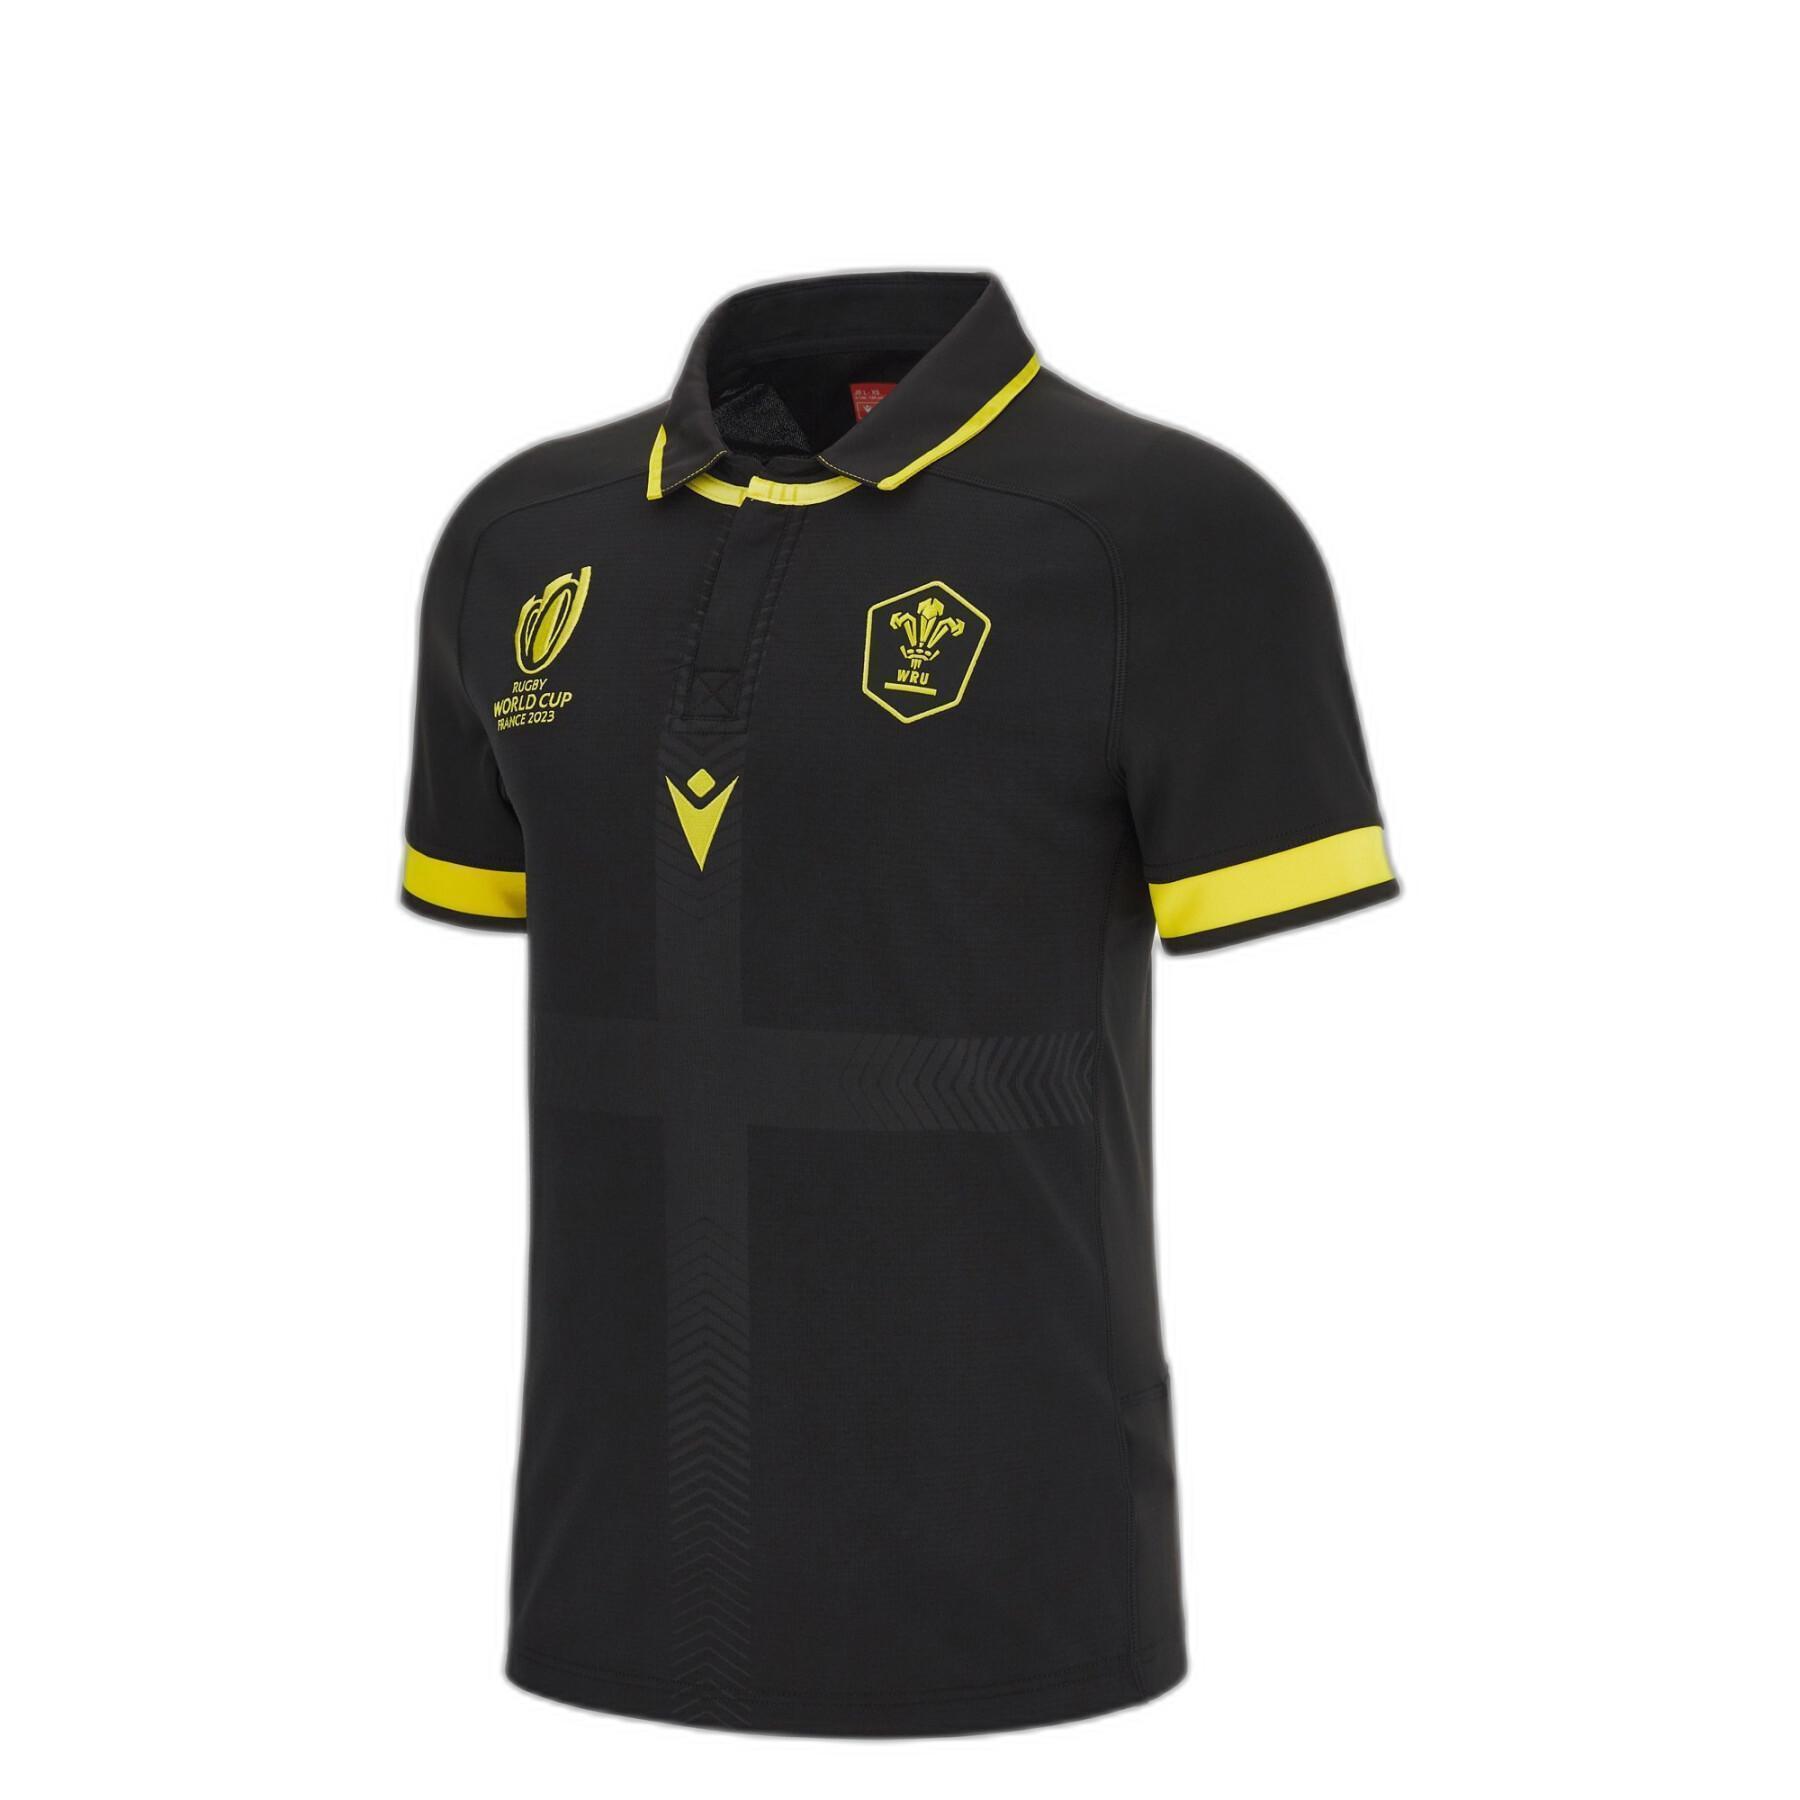 World Cup 2023 children's outdoor poly jersey 